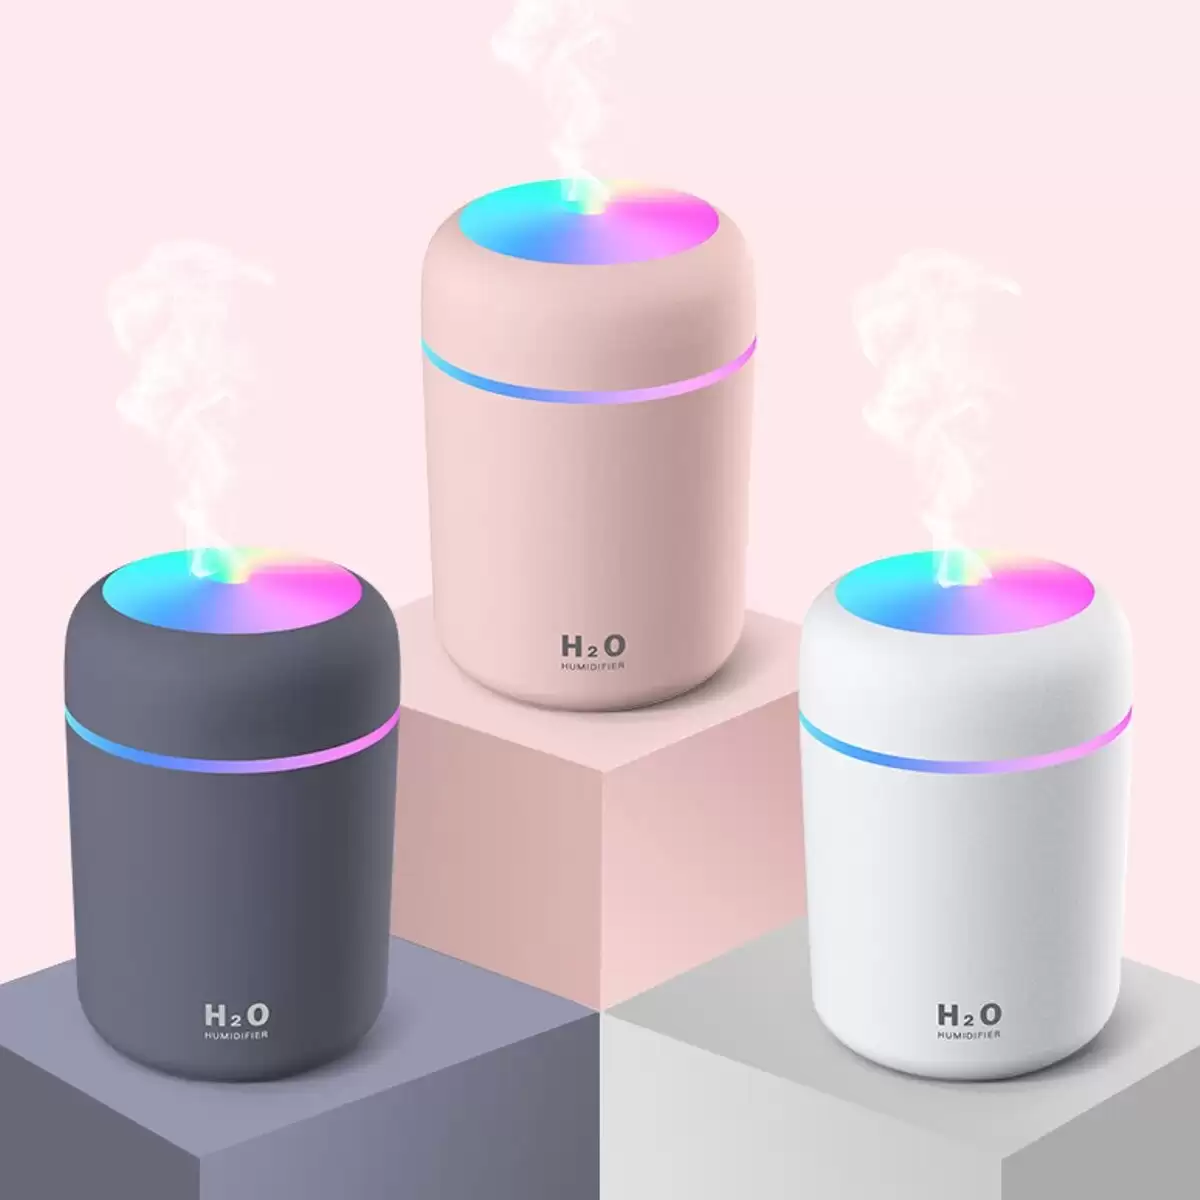 Order In Just $8.99 300ml Ultrasonic Electric Air Aroma Diffuser Humidifier 2 Modes Led Night Light For Home Office With This Coupon At Banggood